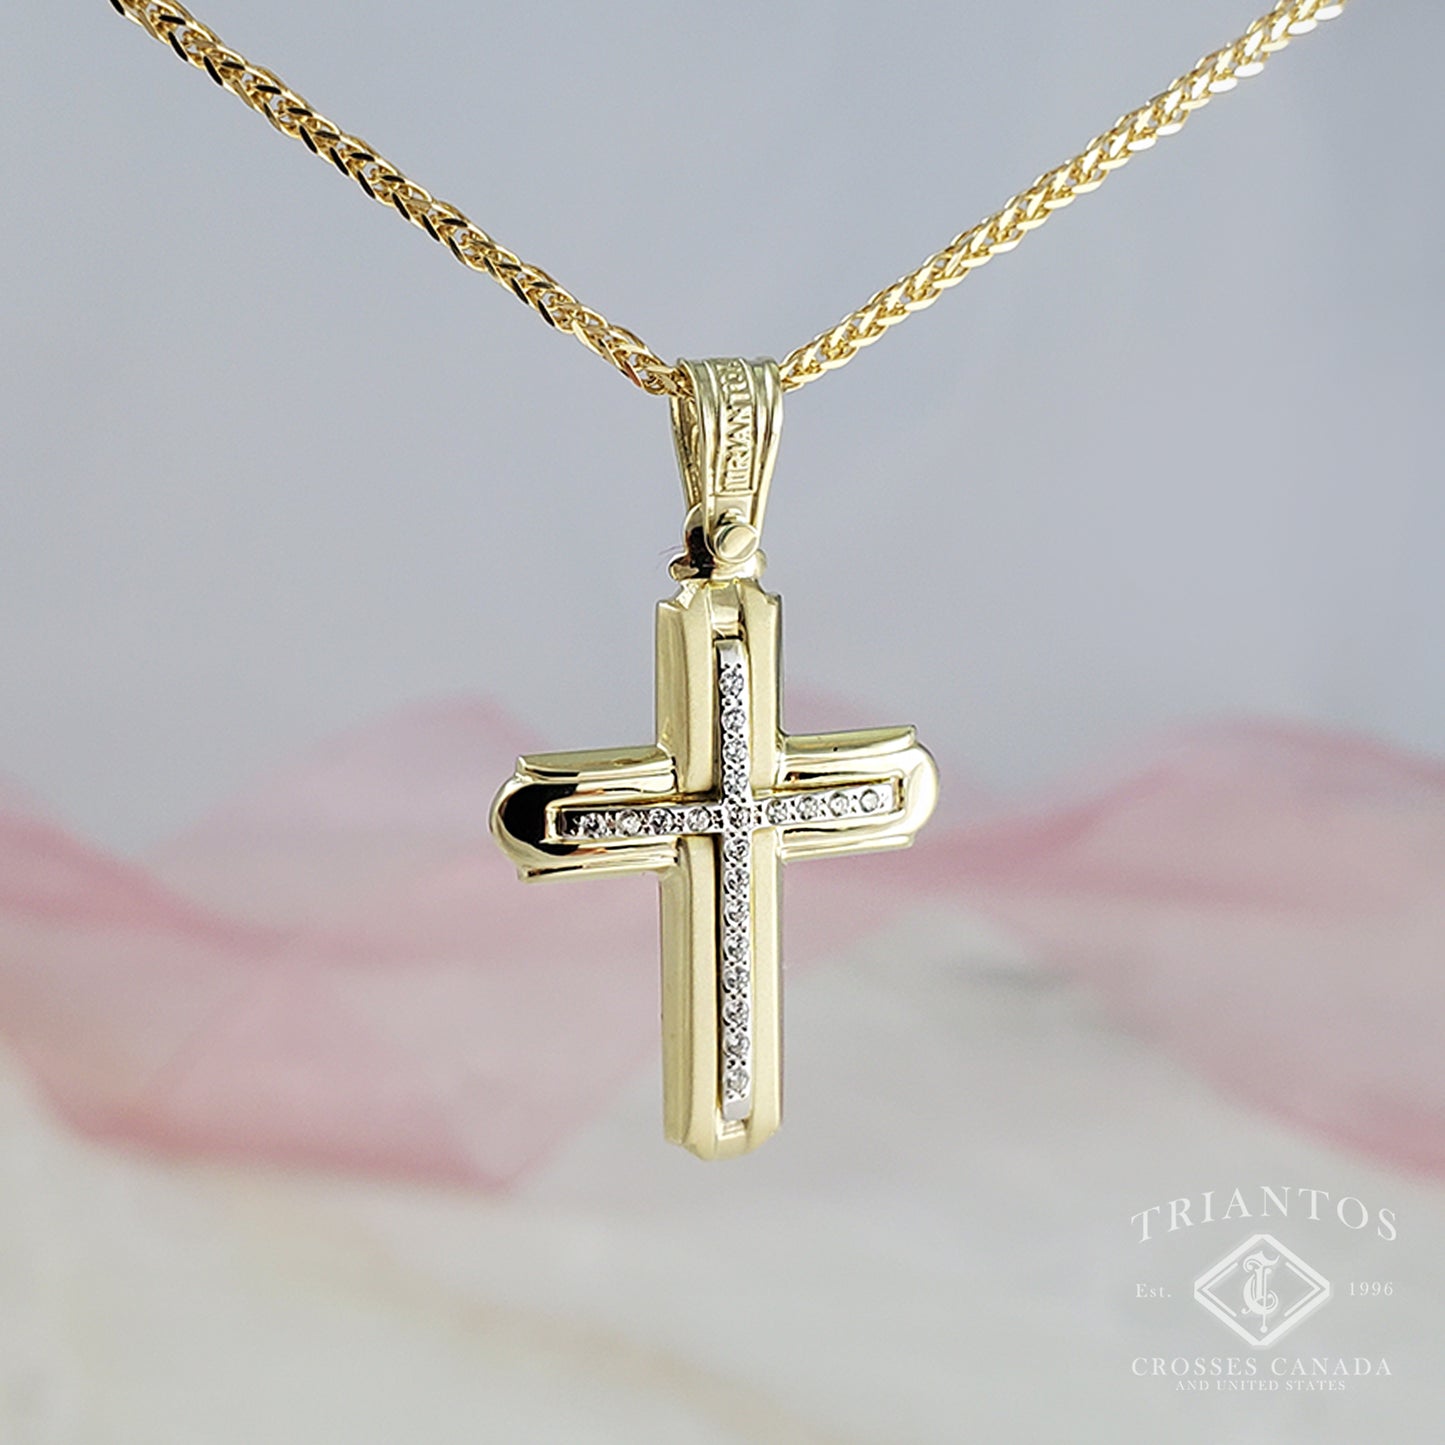 White Gold Triantos cross made in greece with 21 cubic zerconia stones with a matte and polished finished for woman